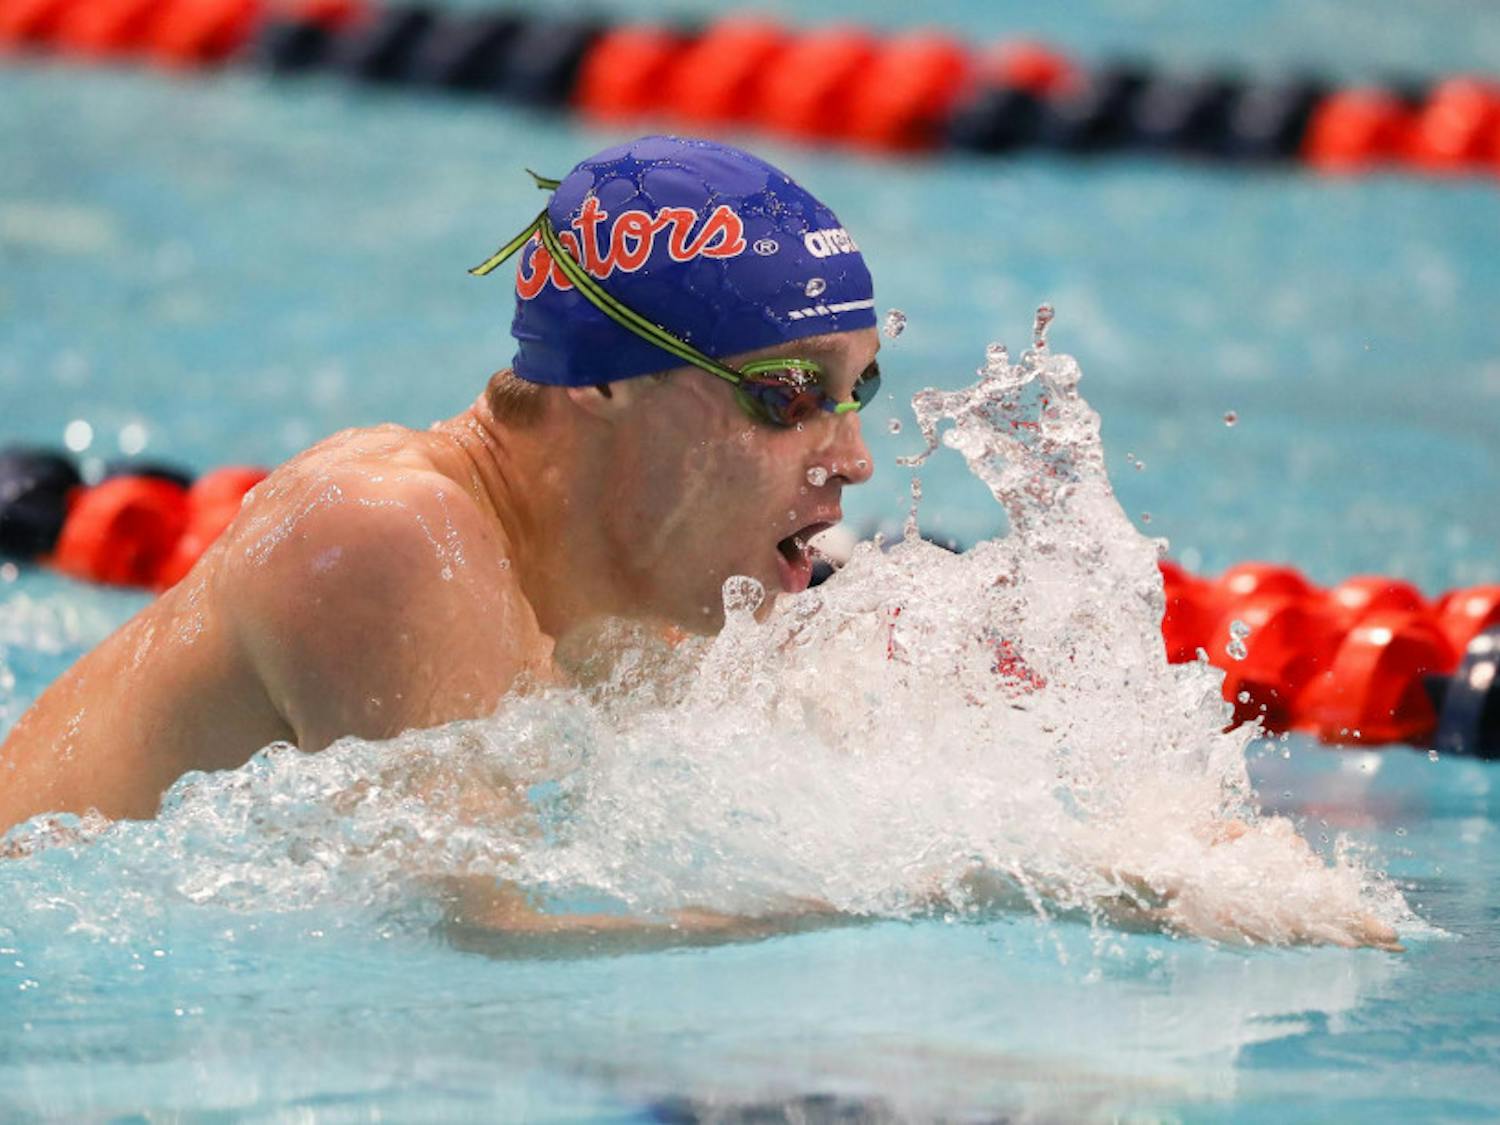 Robert Finke during the Gators' meet on Day 3 of the SEC Championships on Thursday, February 20, 2020 at Martin Aquatics Center in Auburn, Alabama. Finke and other Gators return to Auburn for an invitational this week.